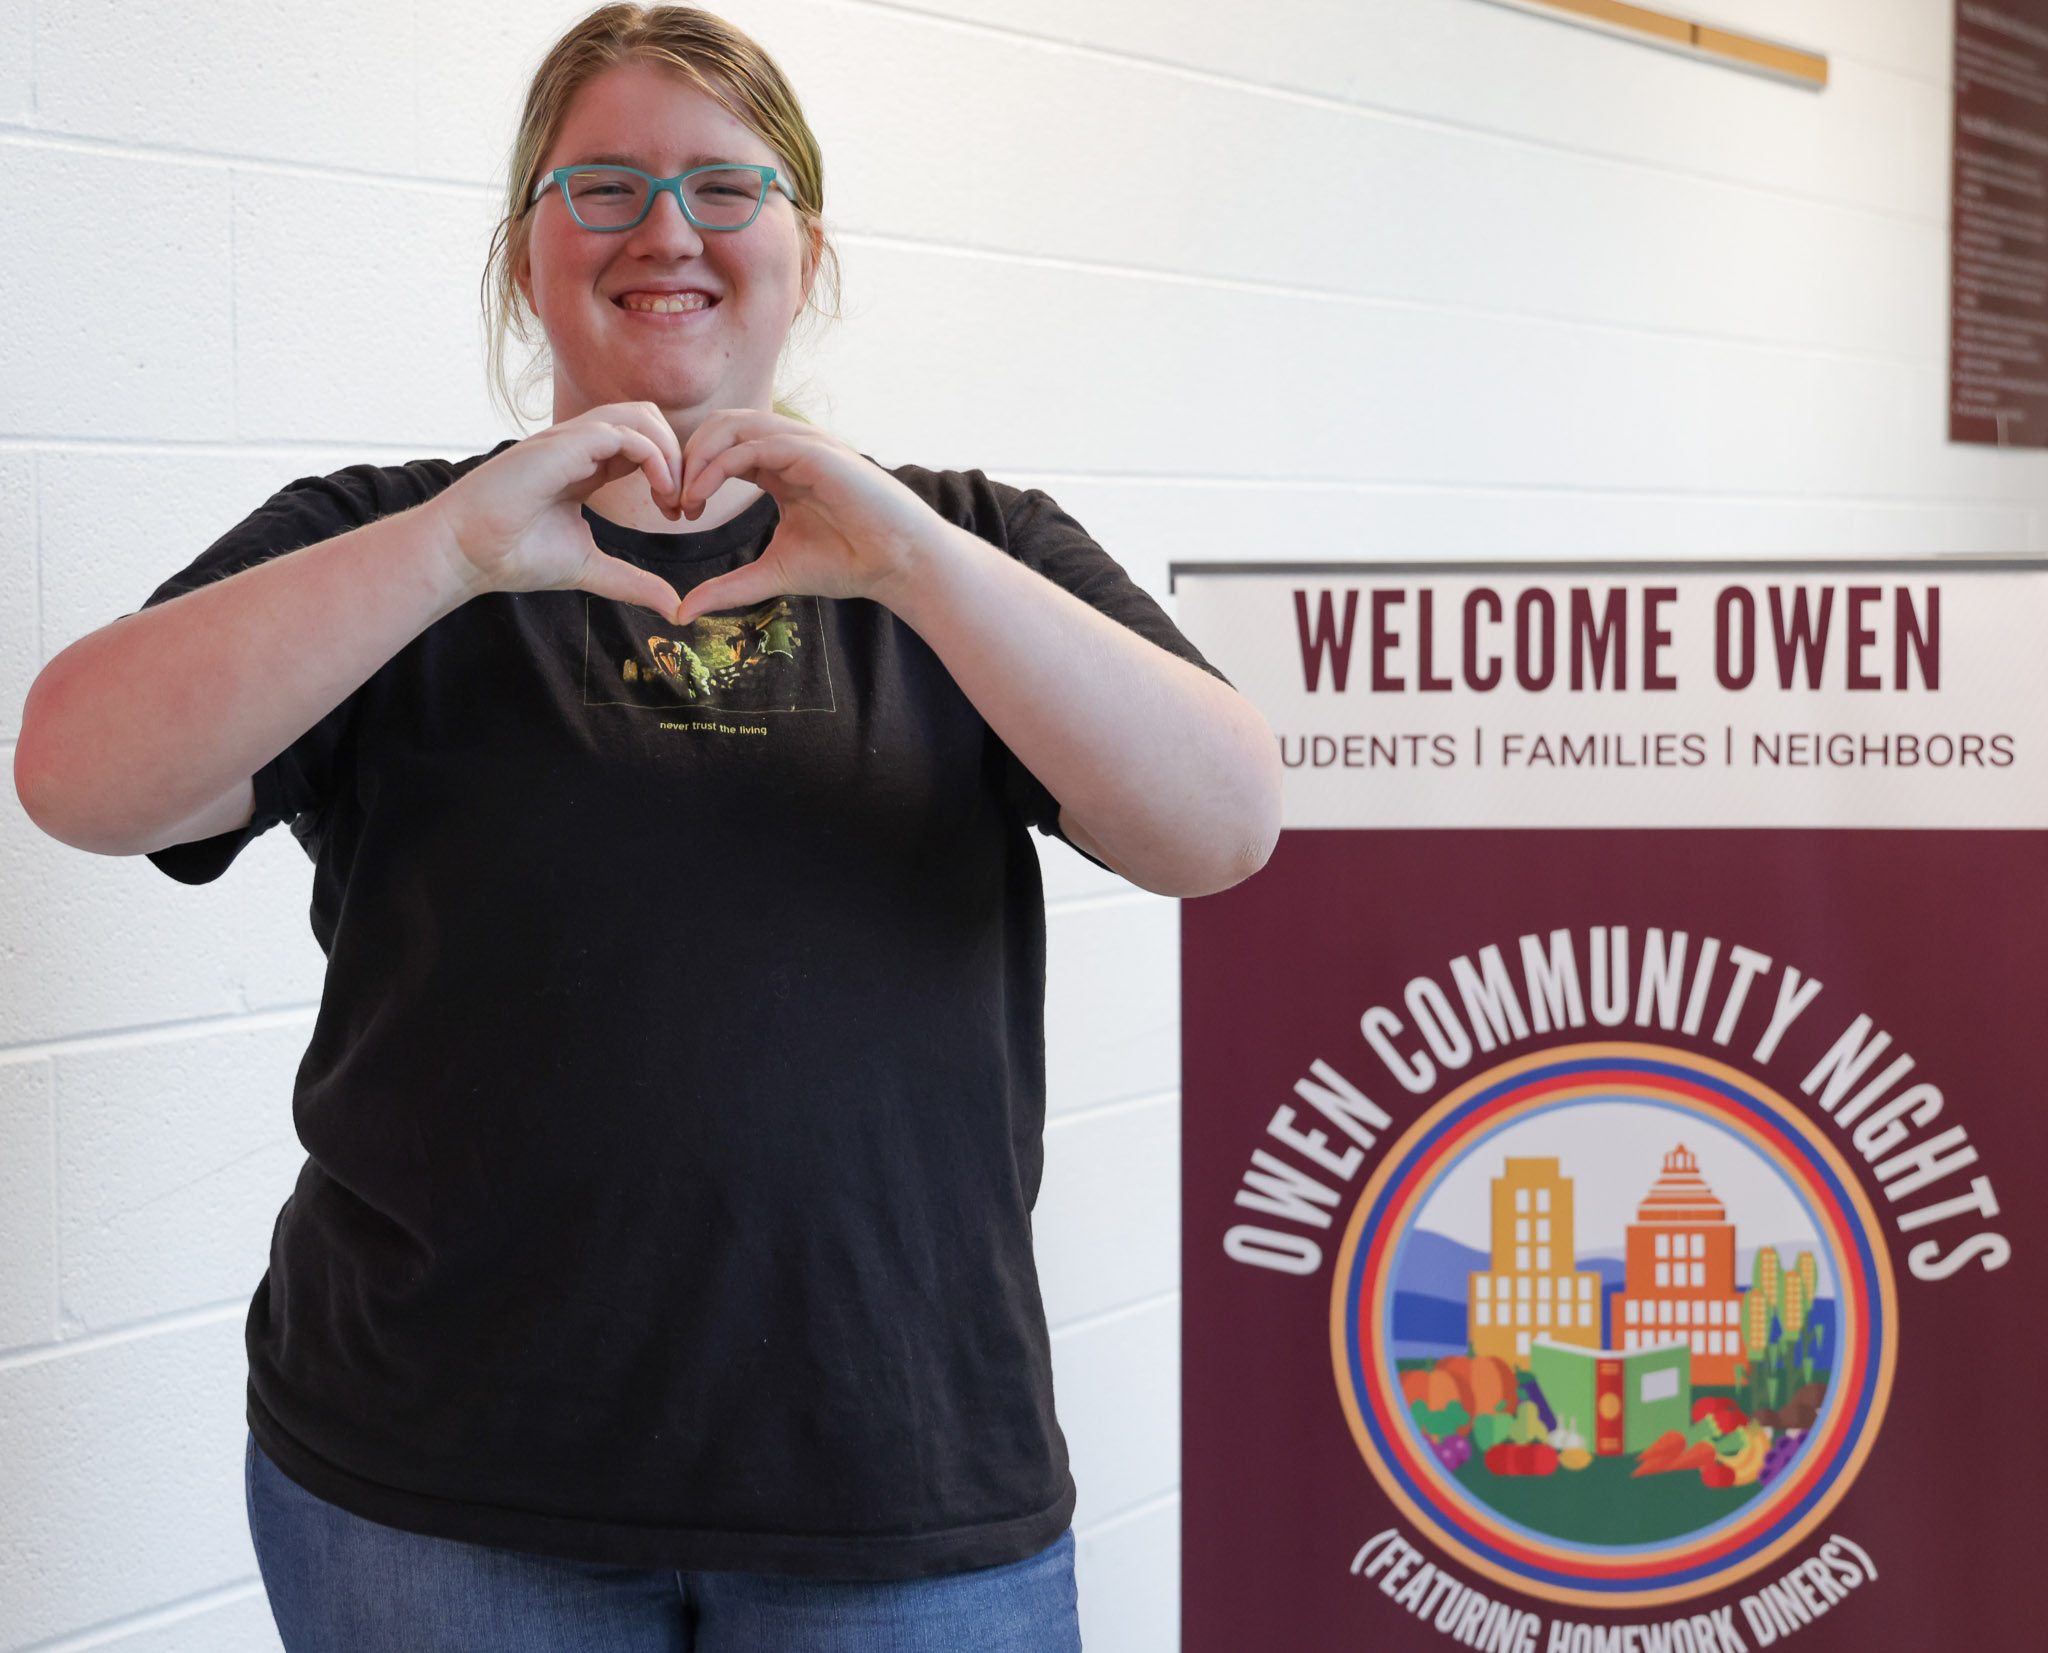 Jordan Rodgers is passionate about community engagement. She tries to listen to and let the community guide her volunteer actions. 